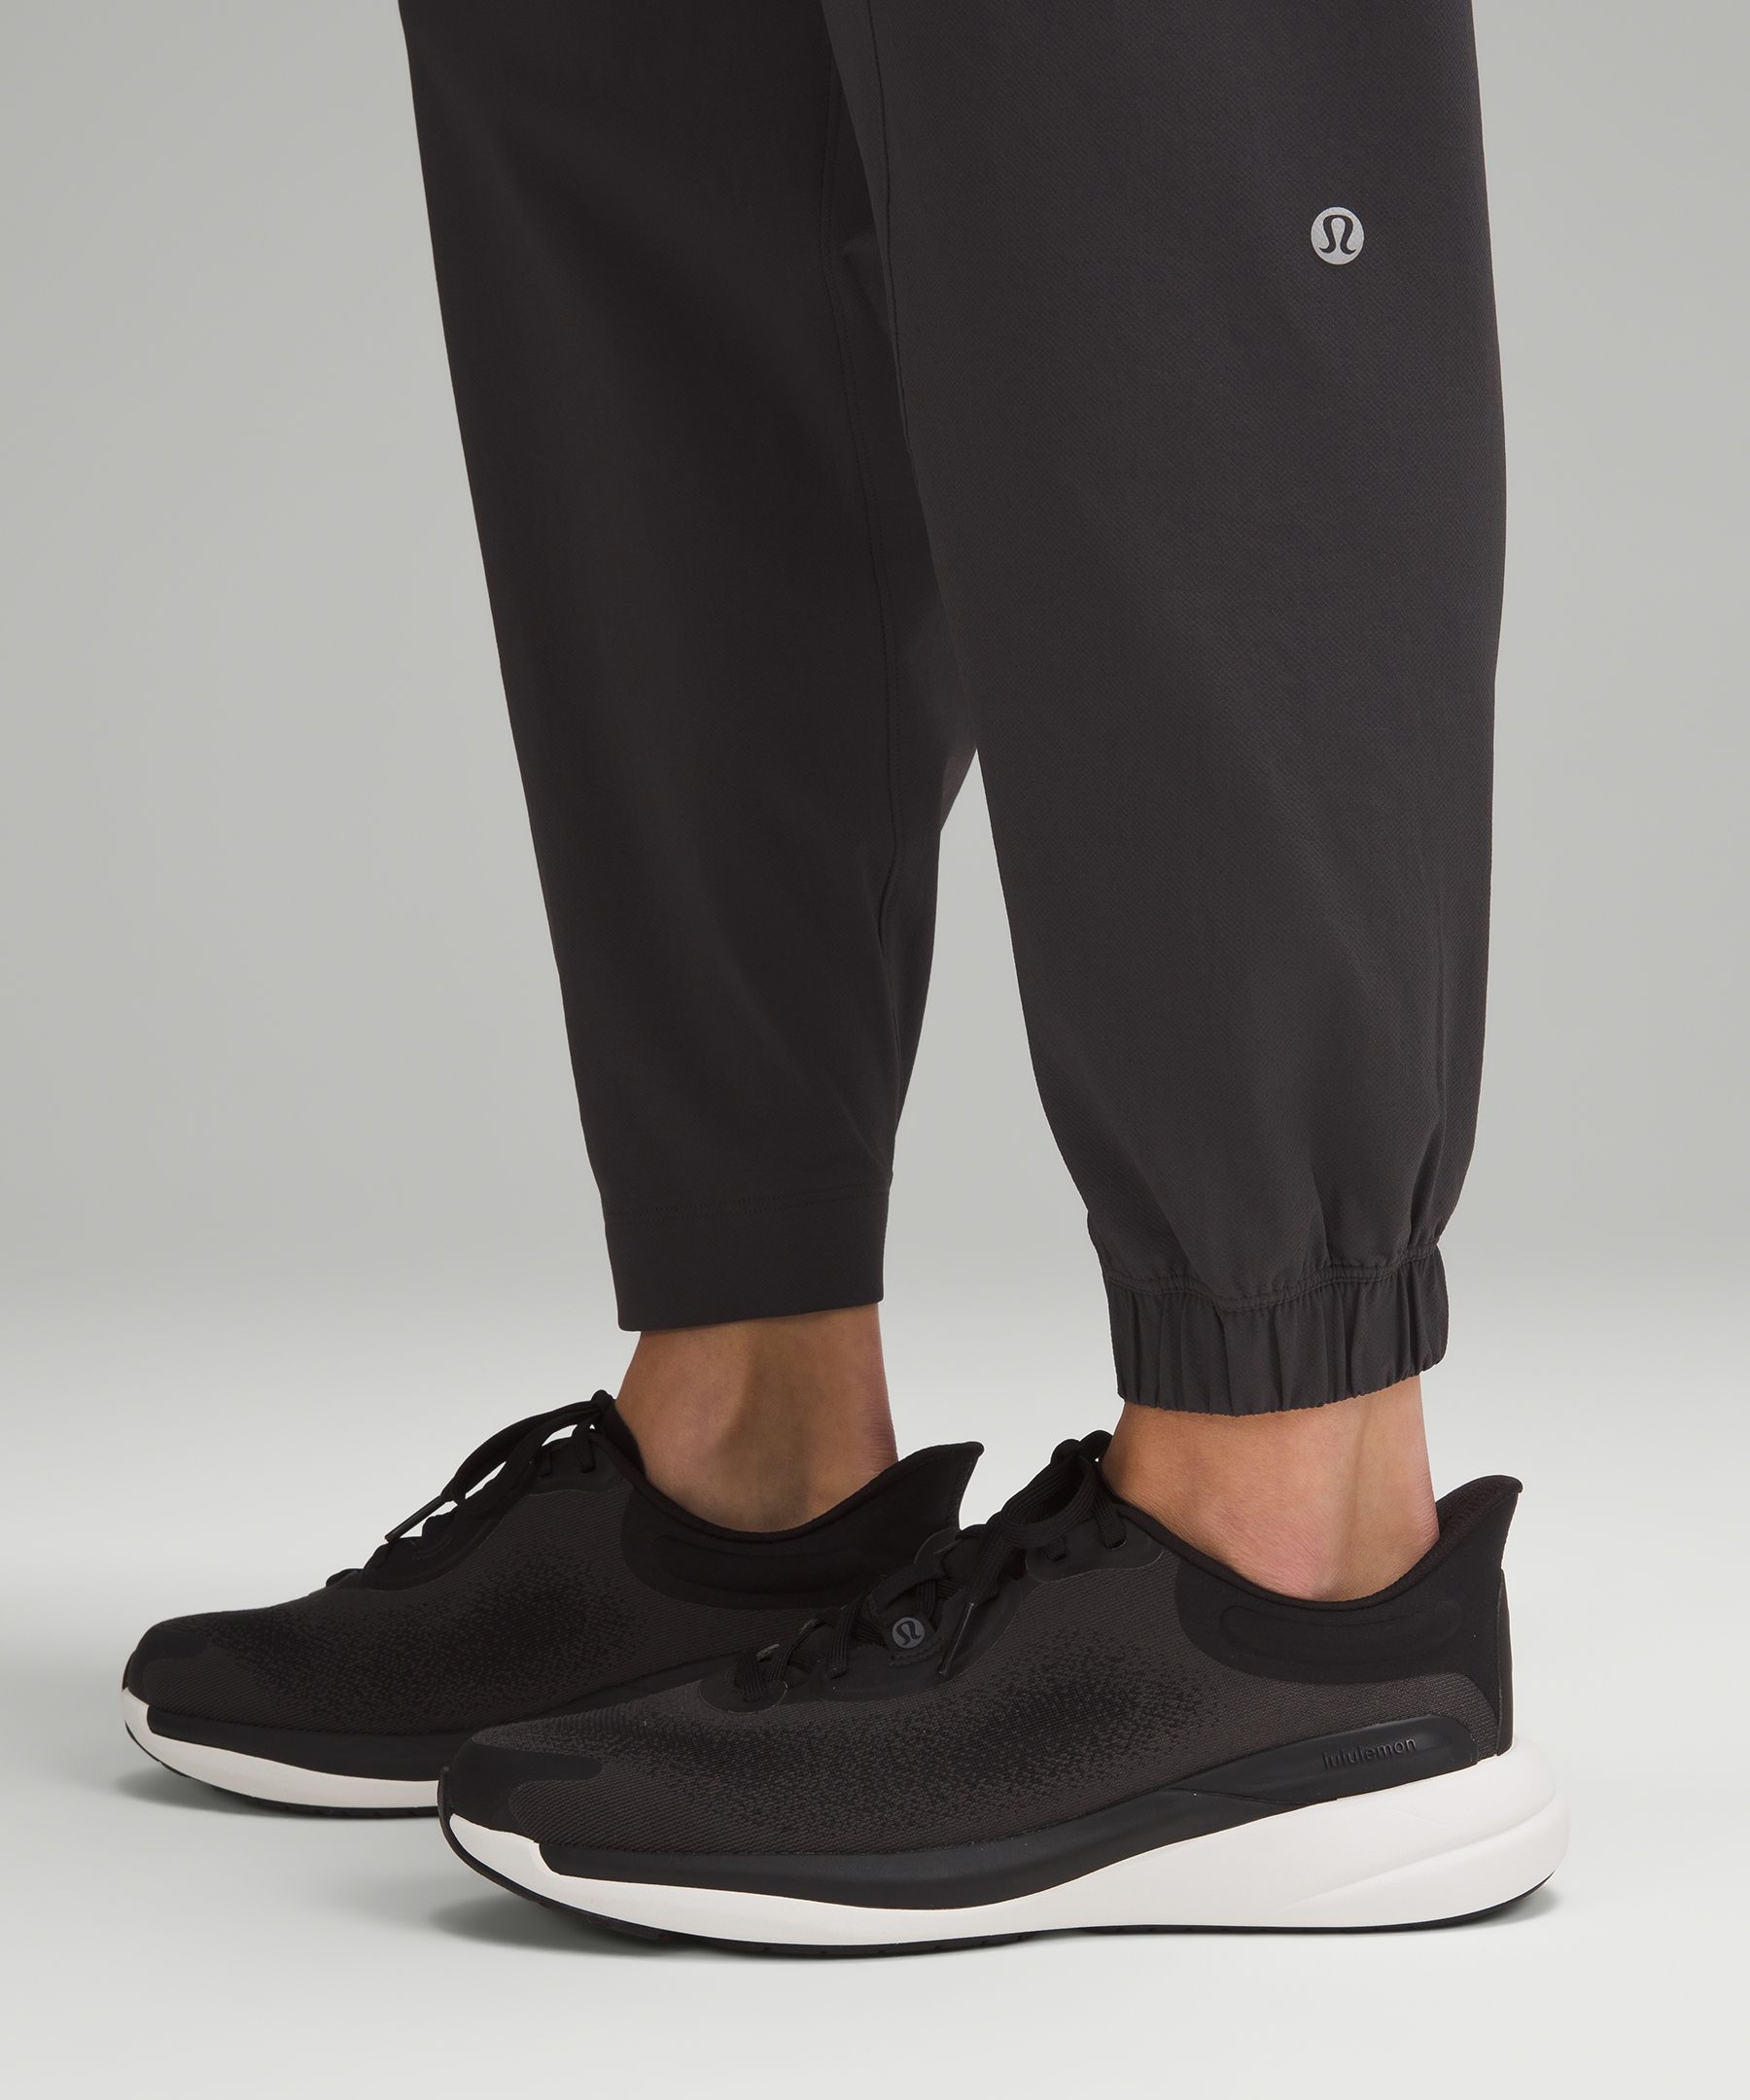 lululemon athletica License To Train High-rise Pants in Black